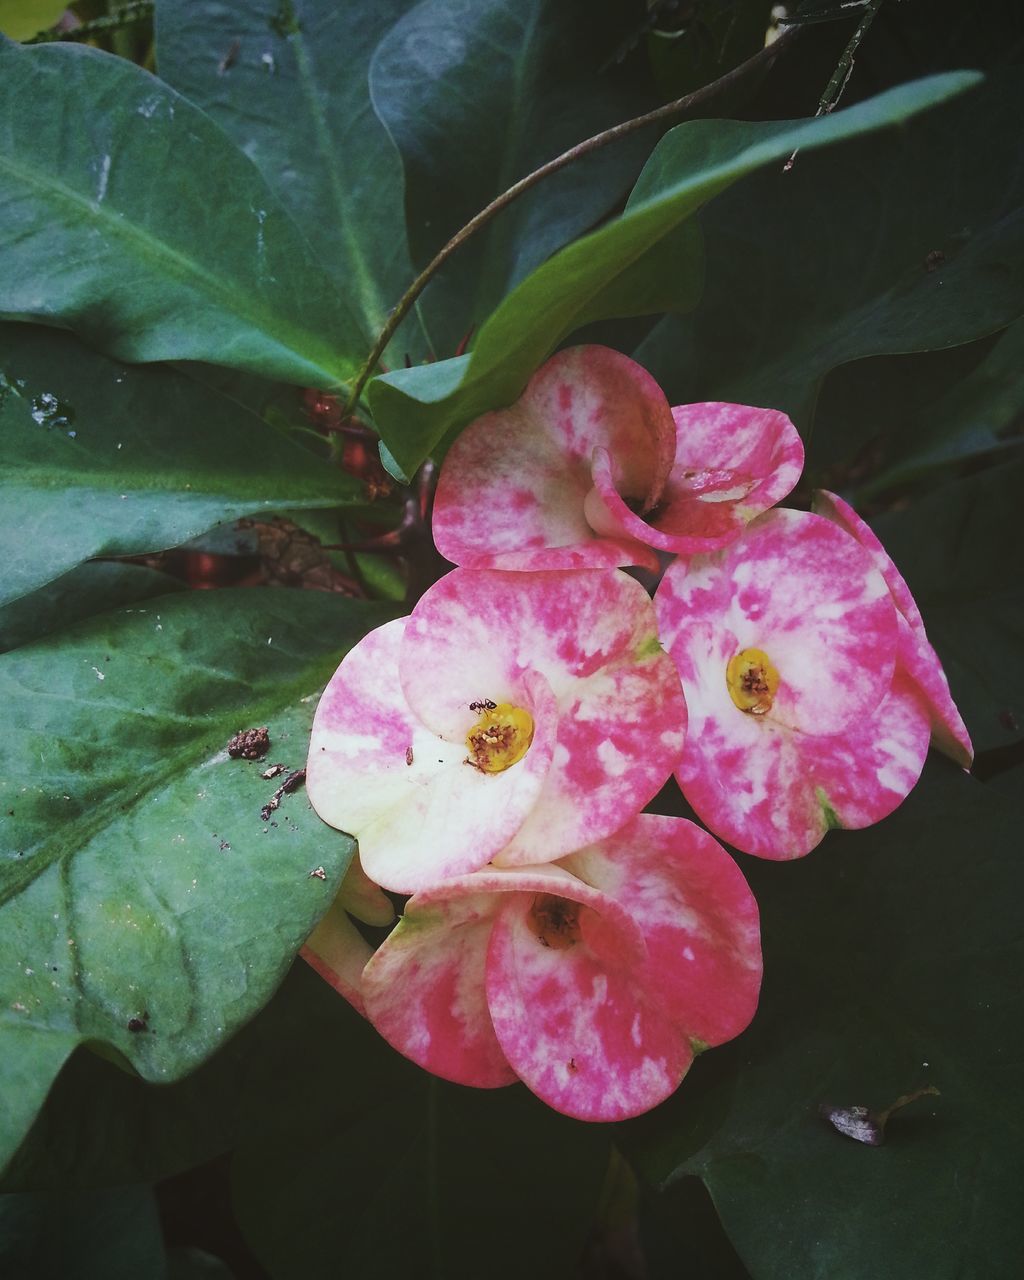 pink color, nature, growth, plant, fragility, beauty in nature, flower, freshness, green color, leaf, outdoors, no people, close-up, petal, flower head, day, water, rhododendron